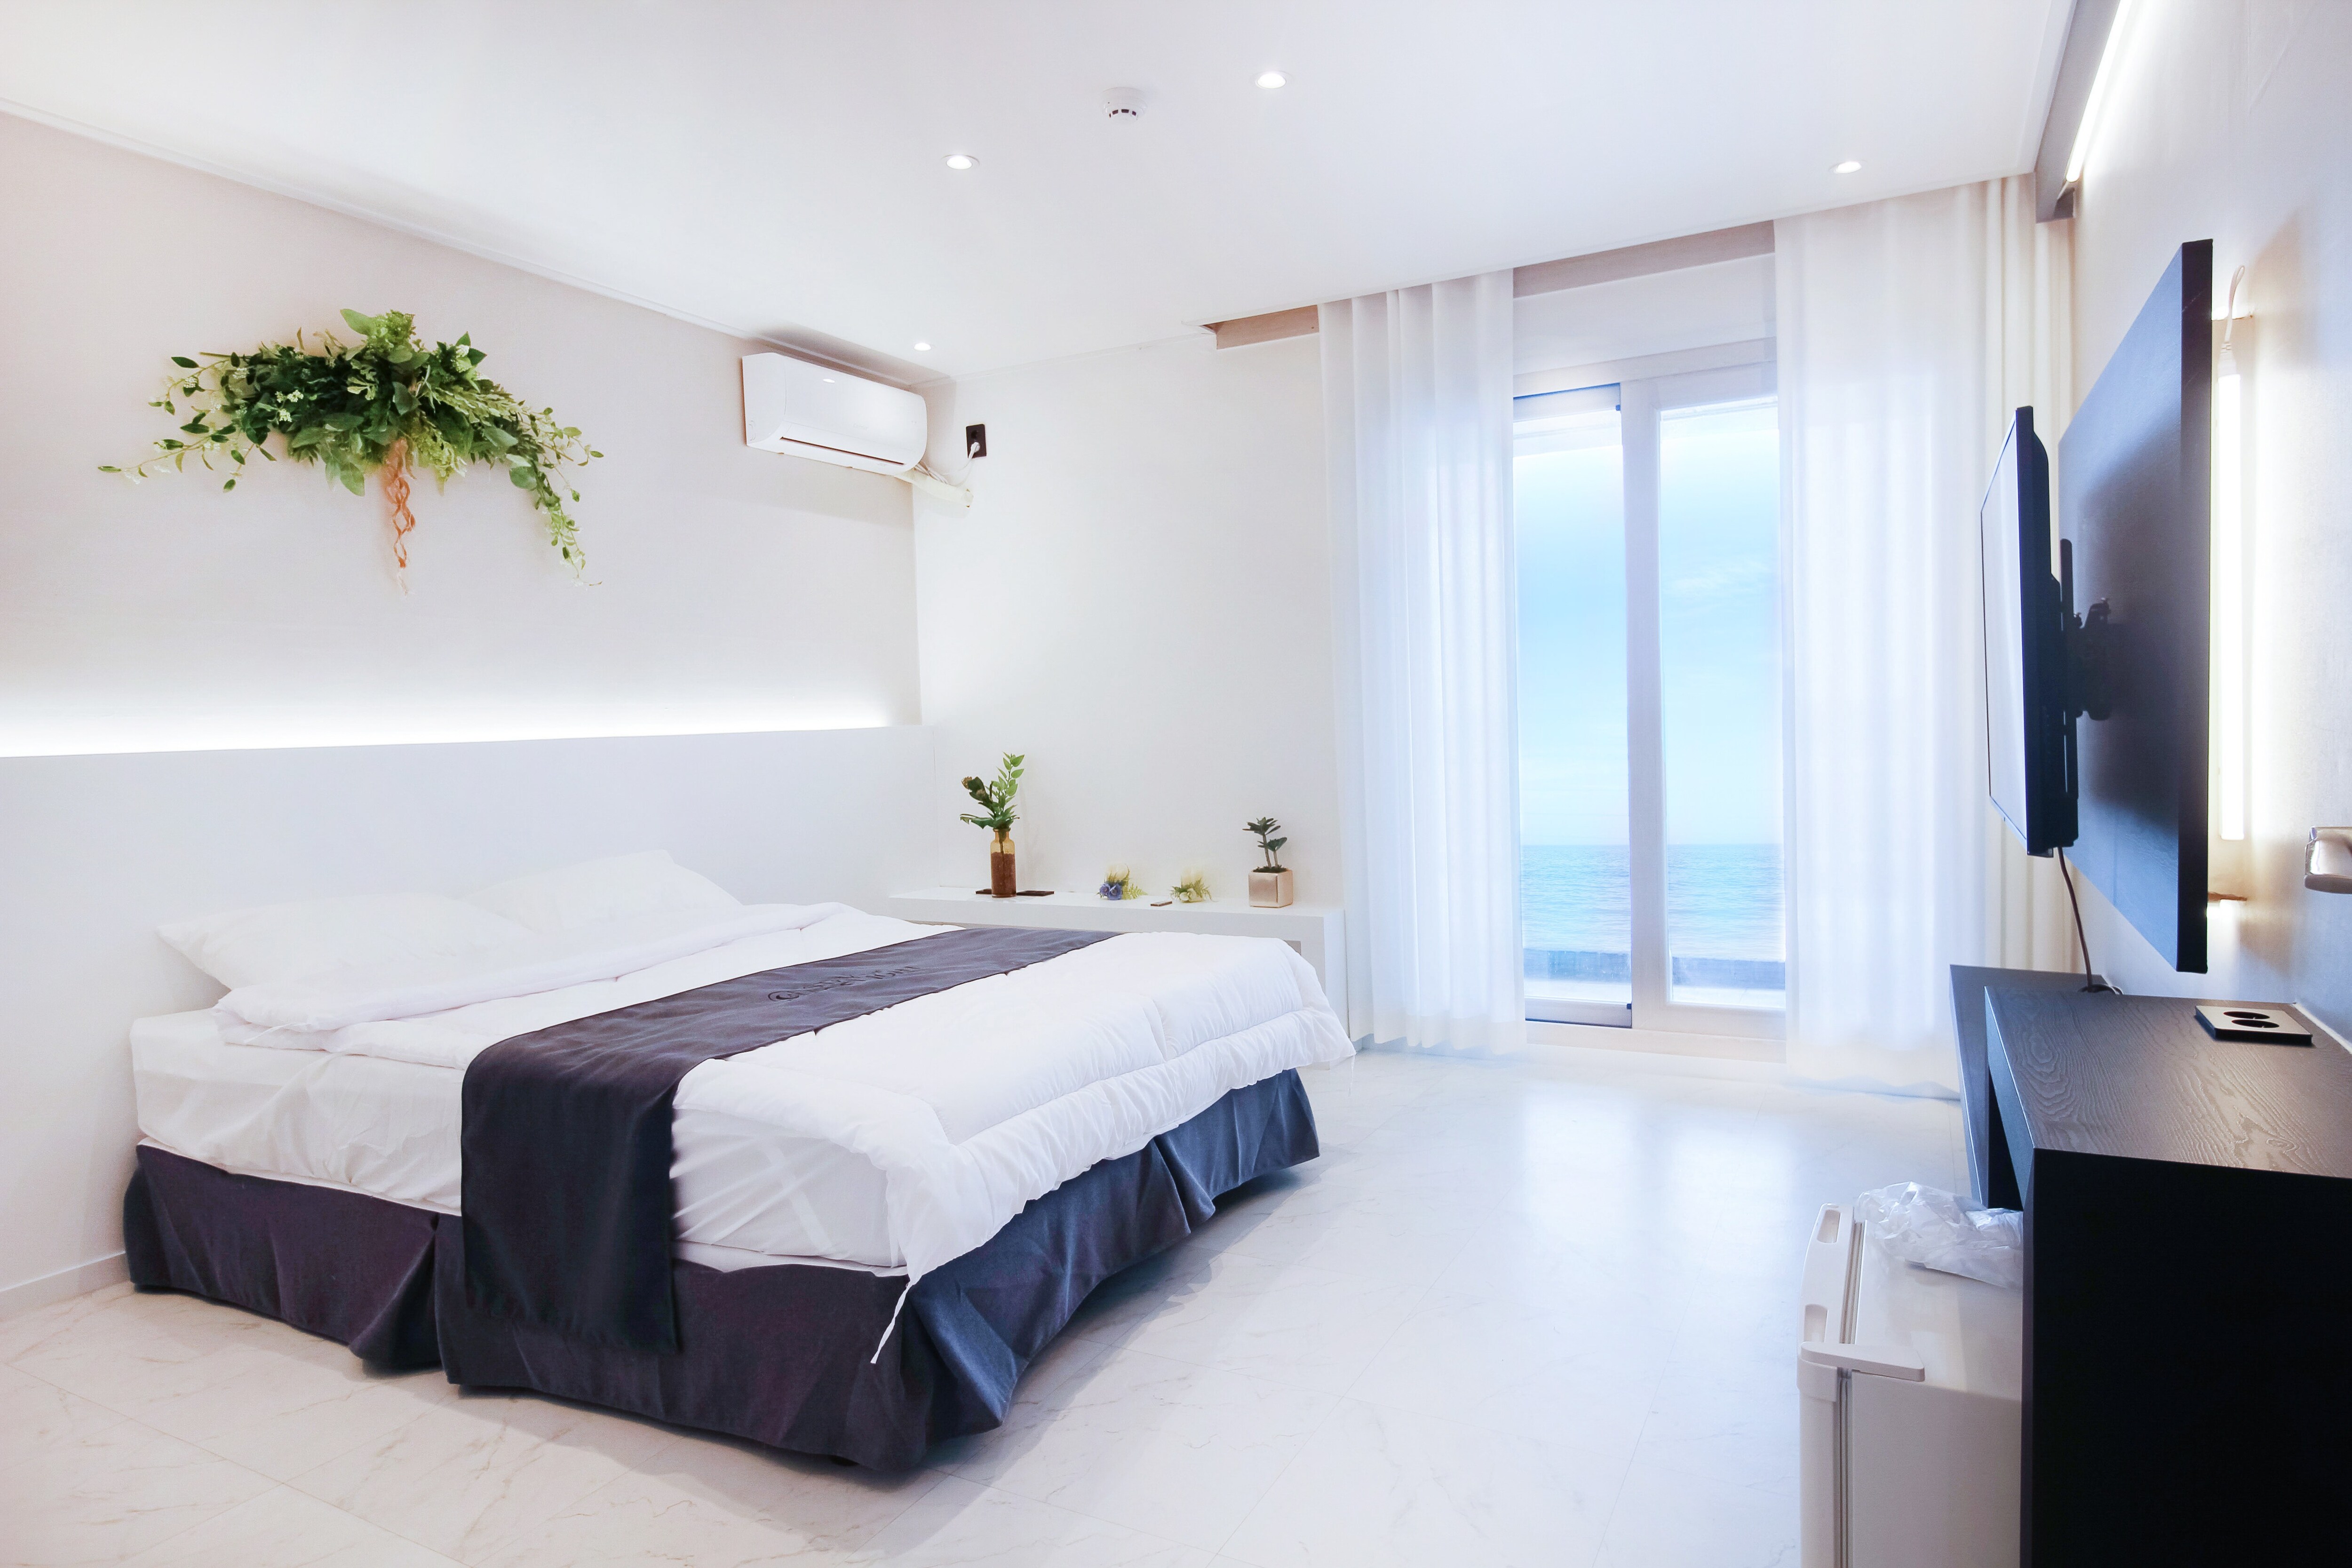 Property Image 1 - Fresh Cheerful Apartment with Ocean Views 3 